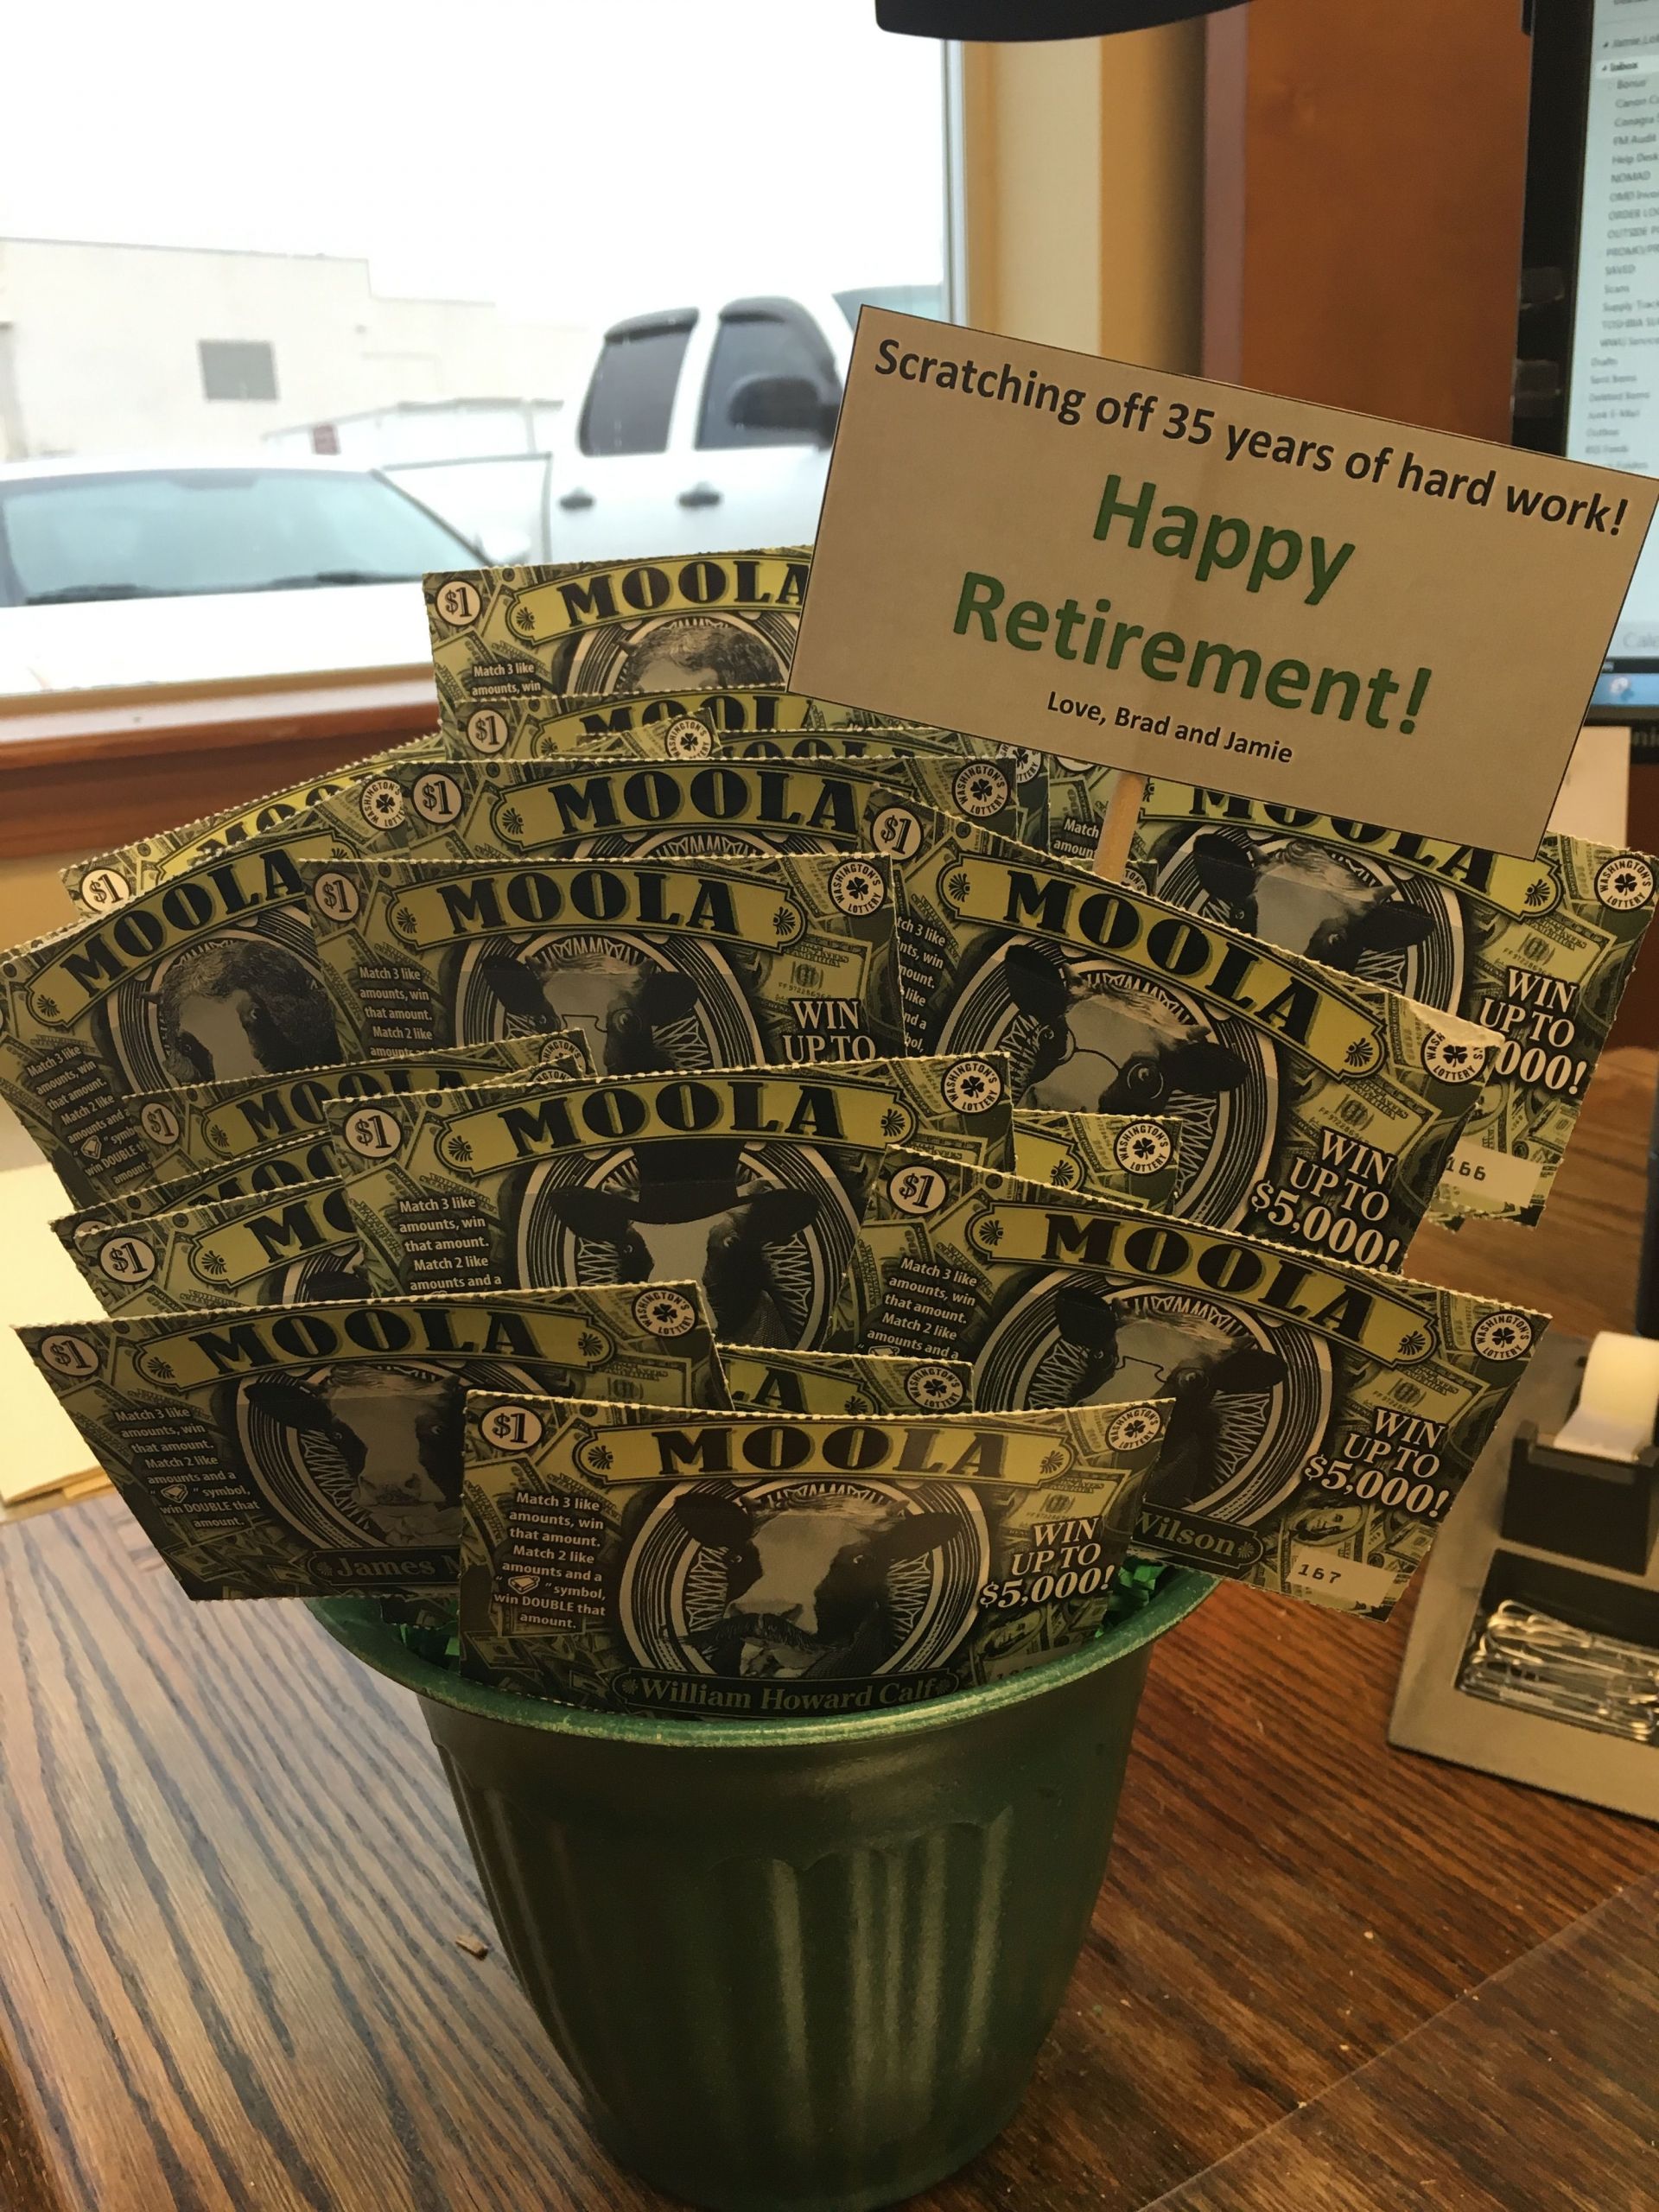 Retirement Party Ideas For Coworker
 Scratch ticket retirement t I made Ideas